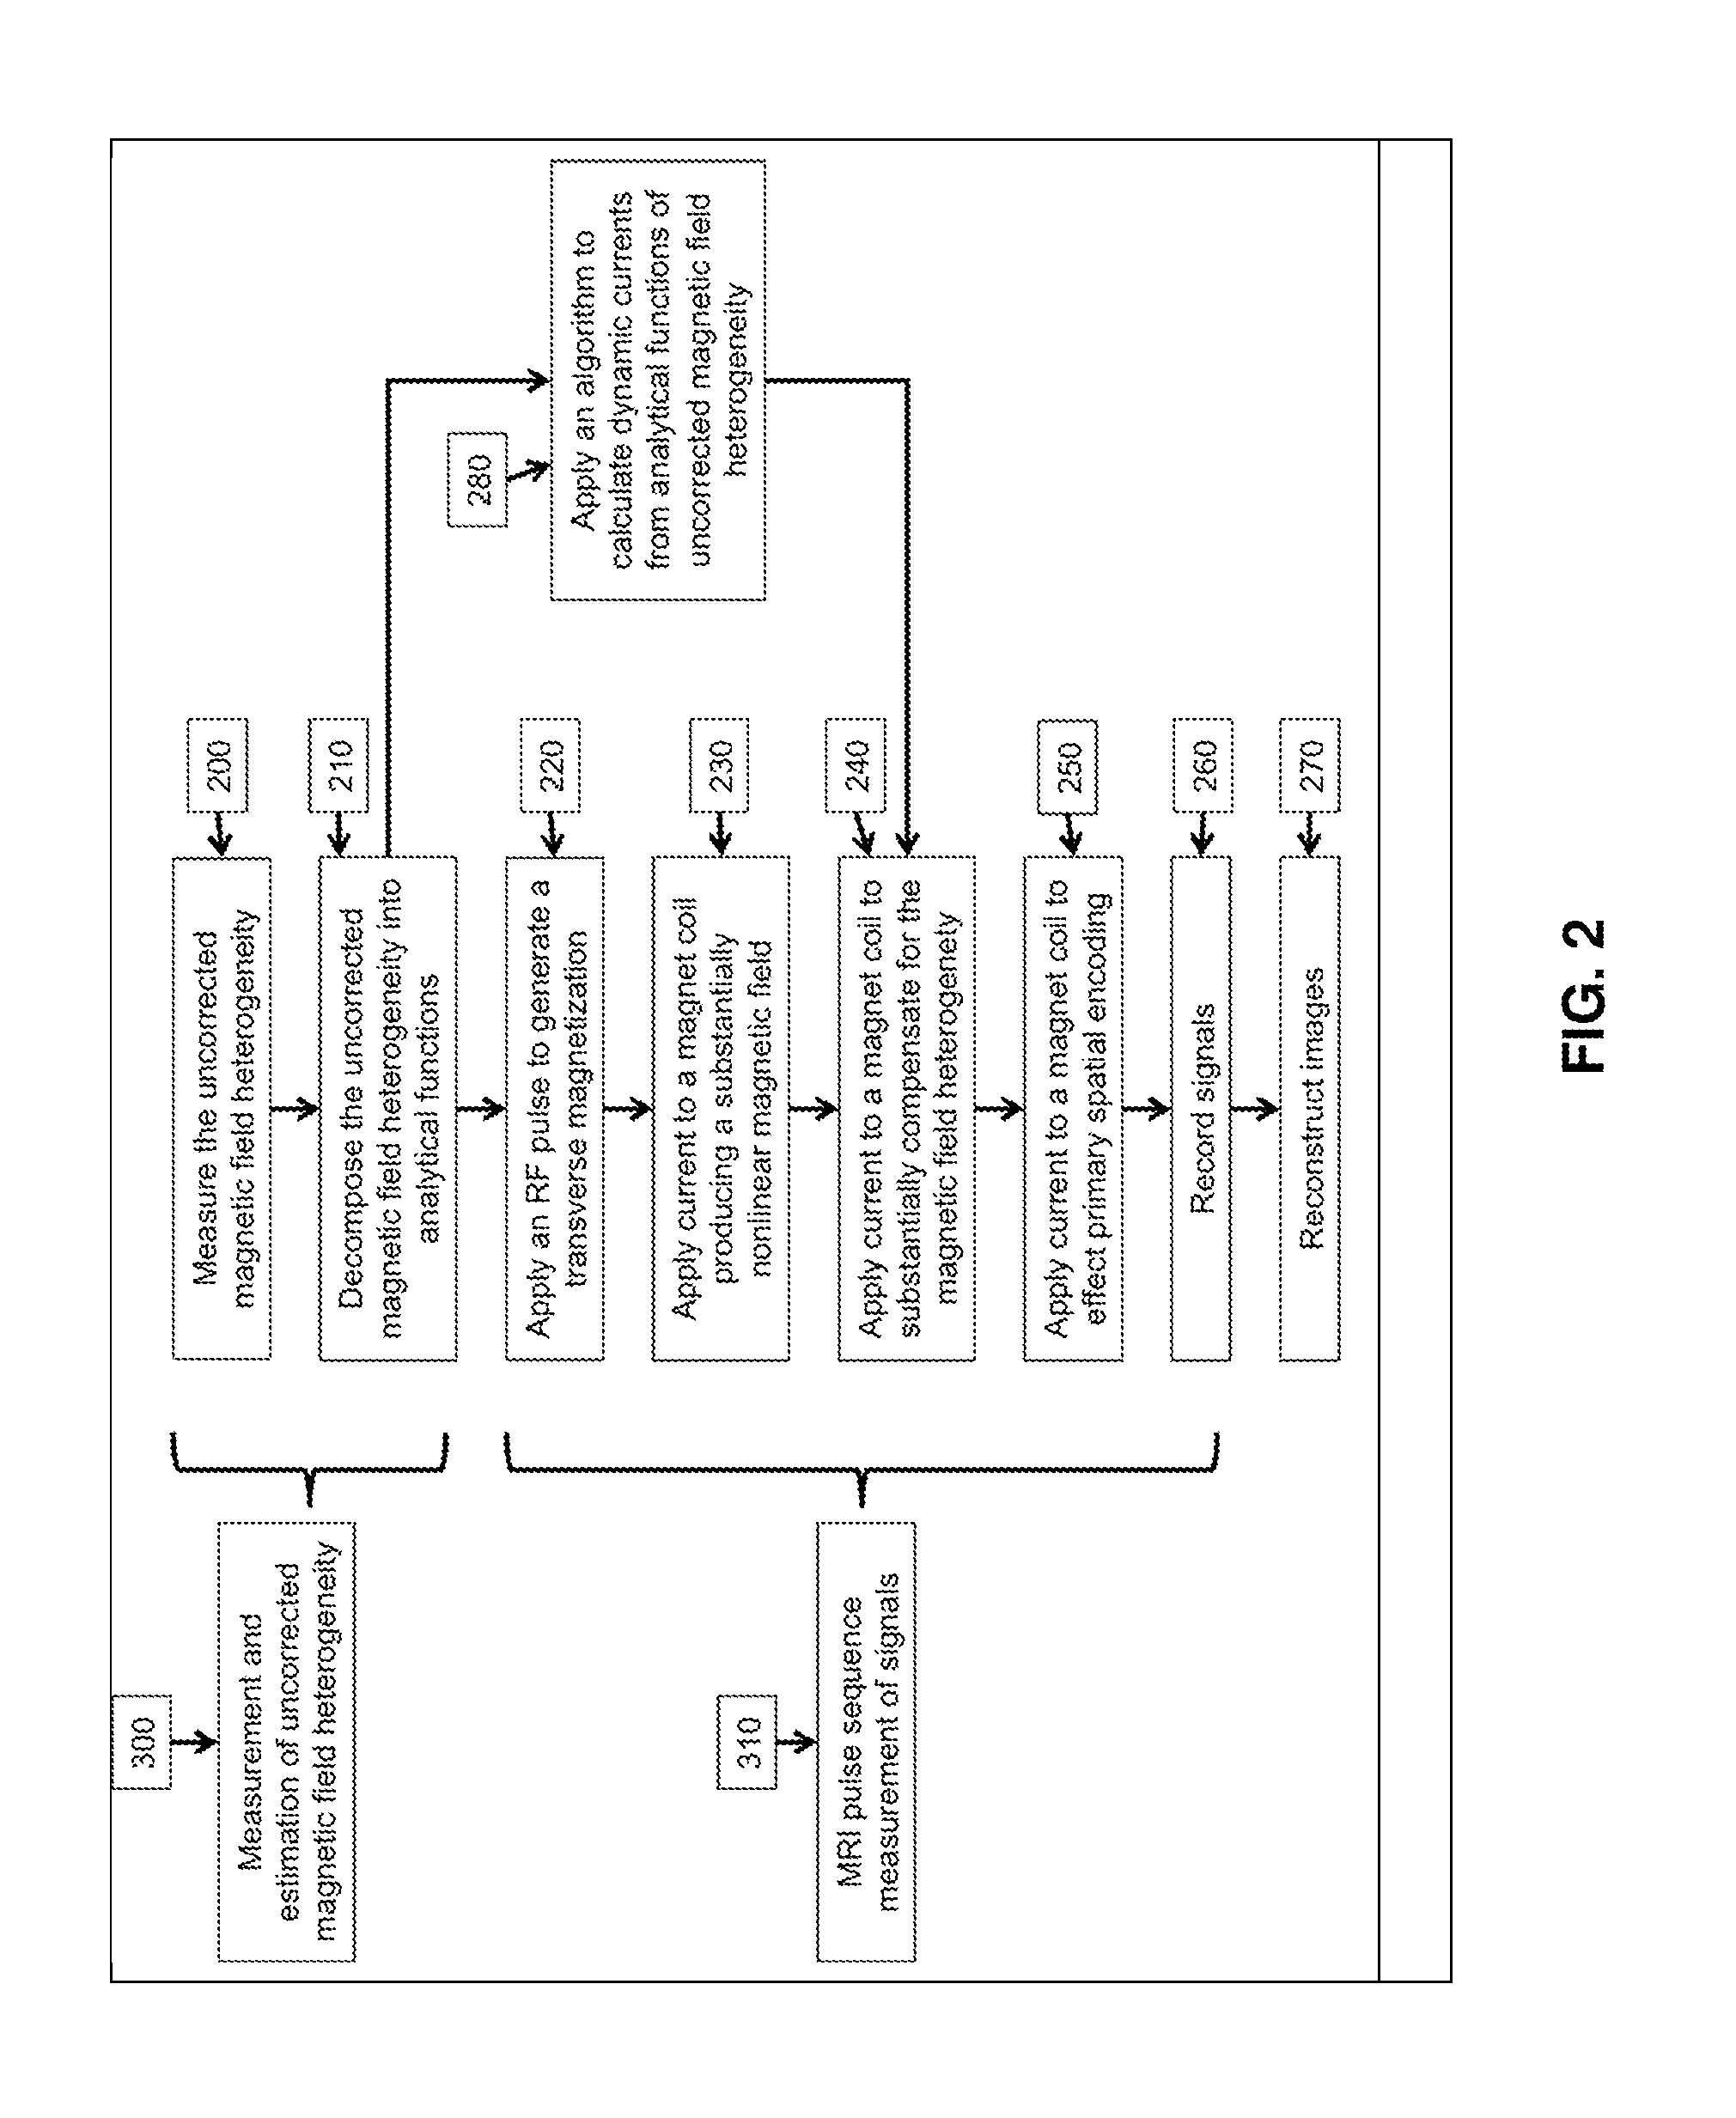 Method of dynamically compensating for magnetic field heterogeneity in magnetic resonance imaging